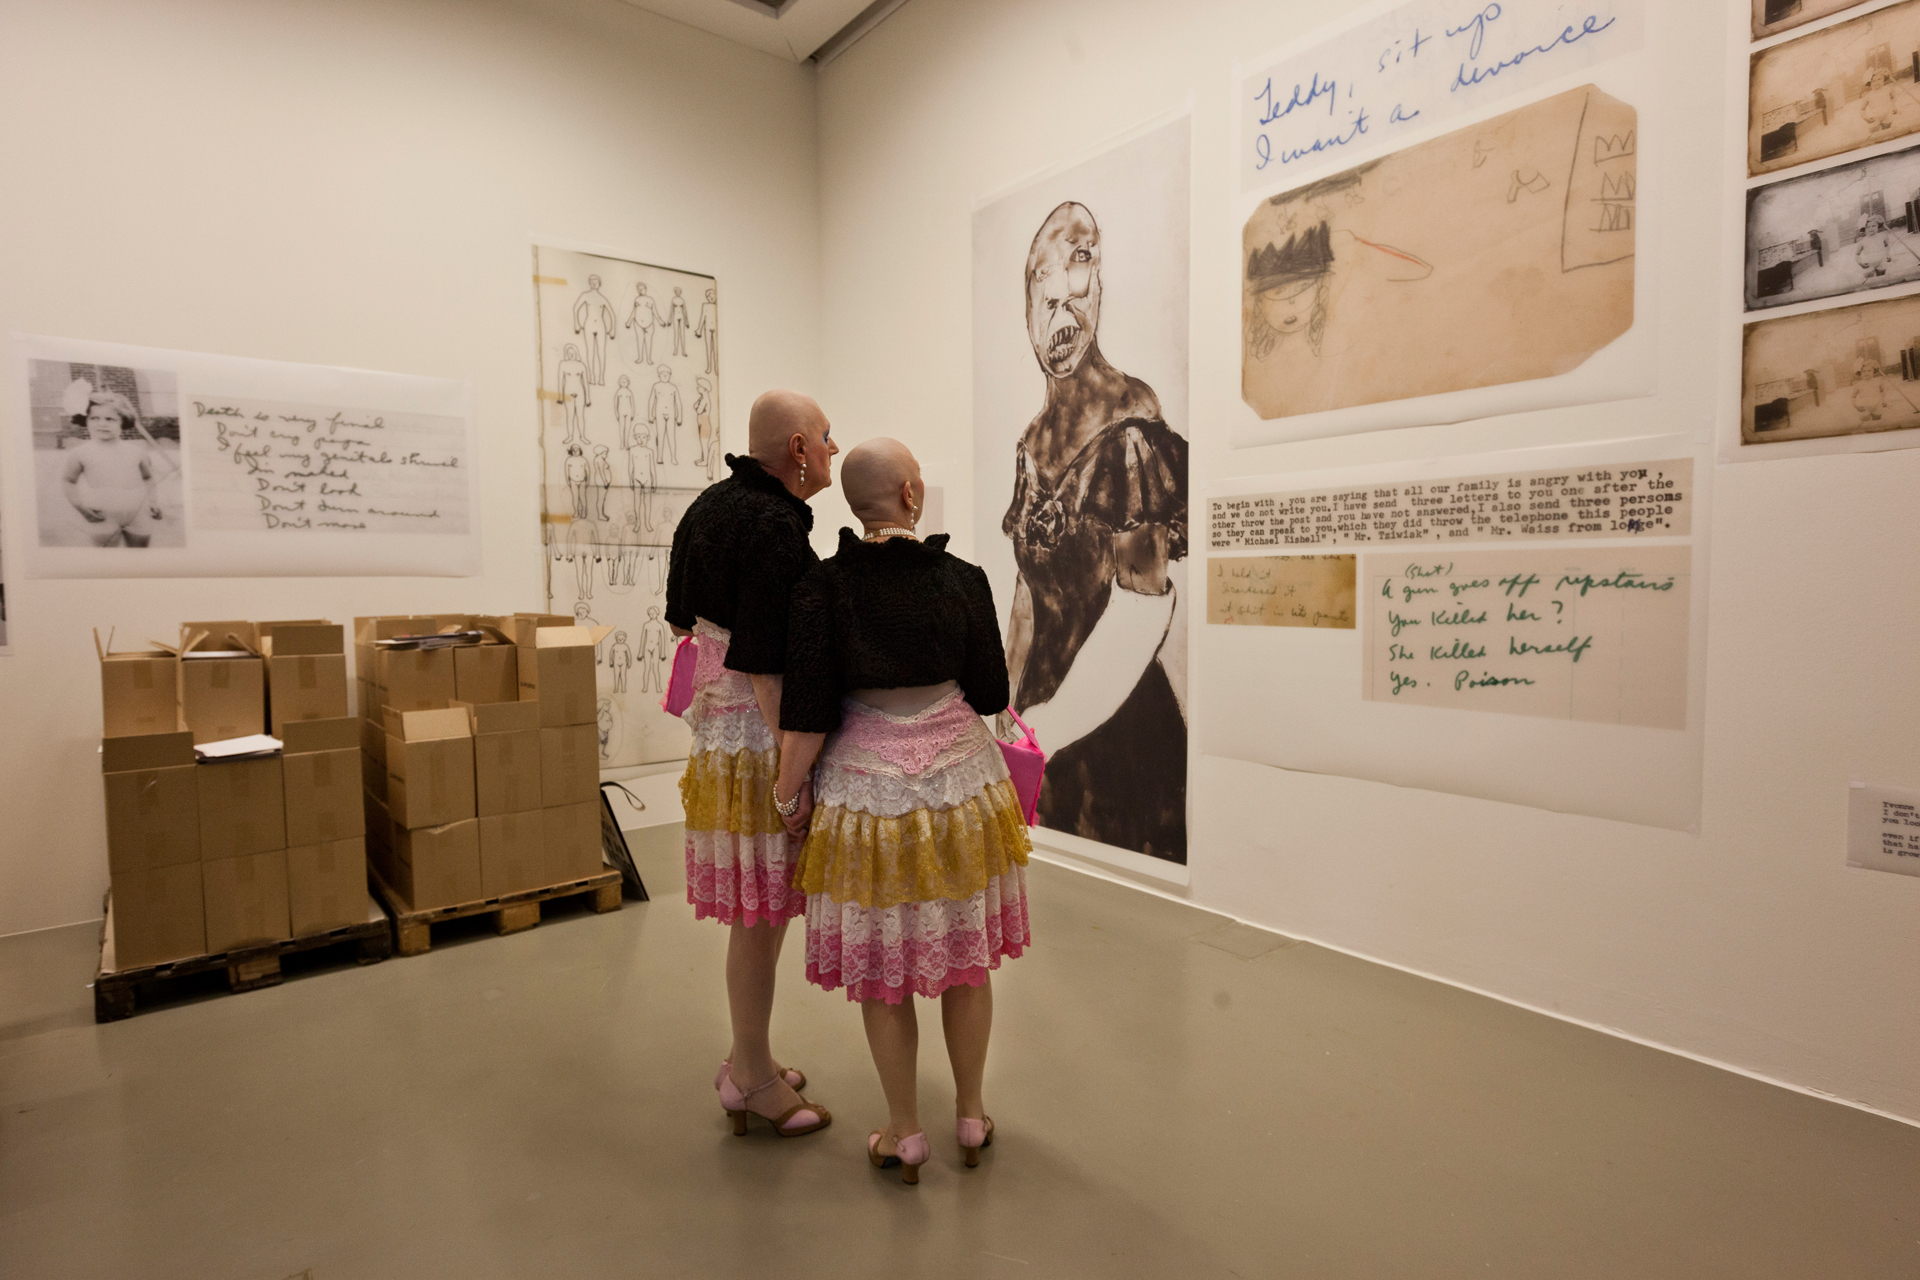  At the center of the American Ida Appleboorg’s work stands the human figure with all its neuroses and complexities. For dOCUMENTA(13) she opened her personal archive that had been unseen for 30 to 40 years and exhibits it publicly. A local pair of a